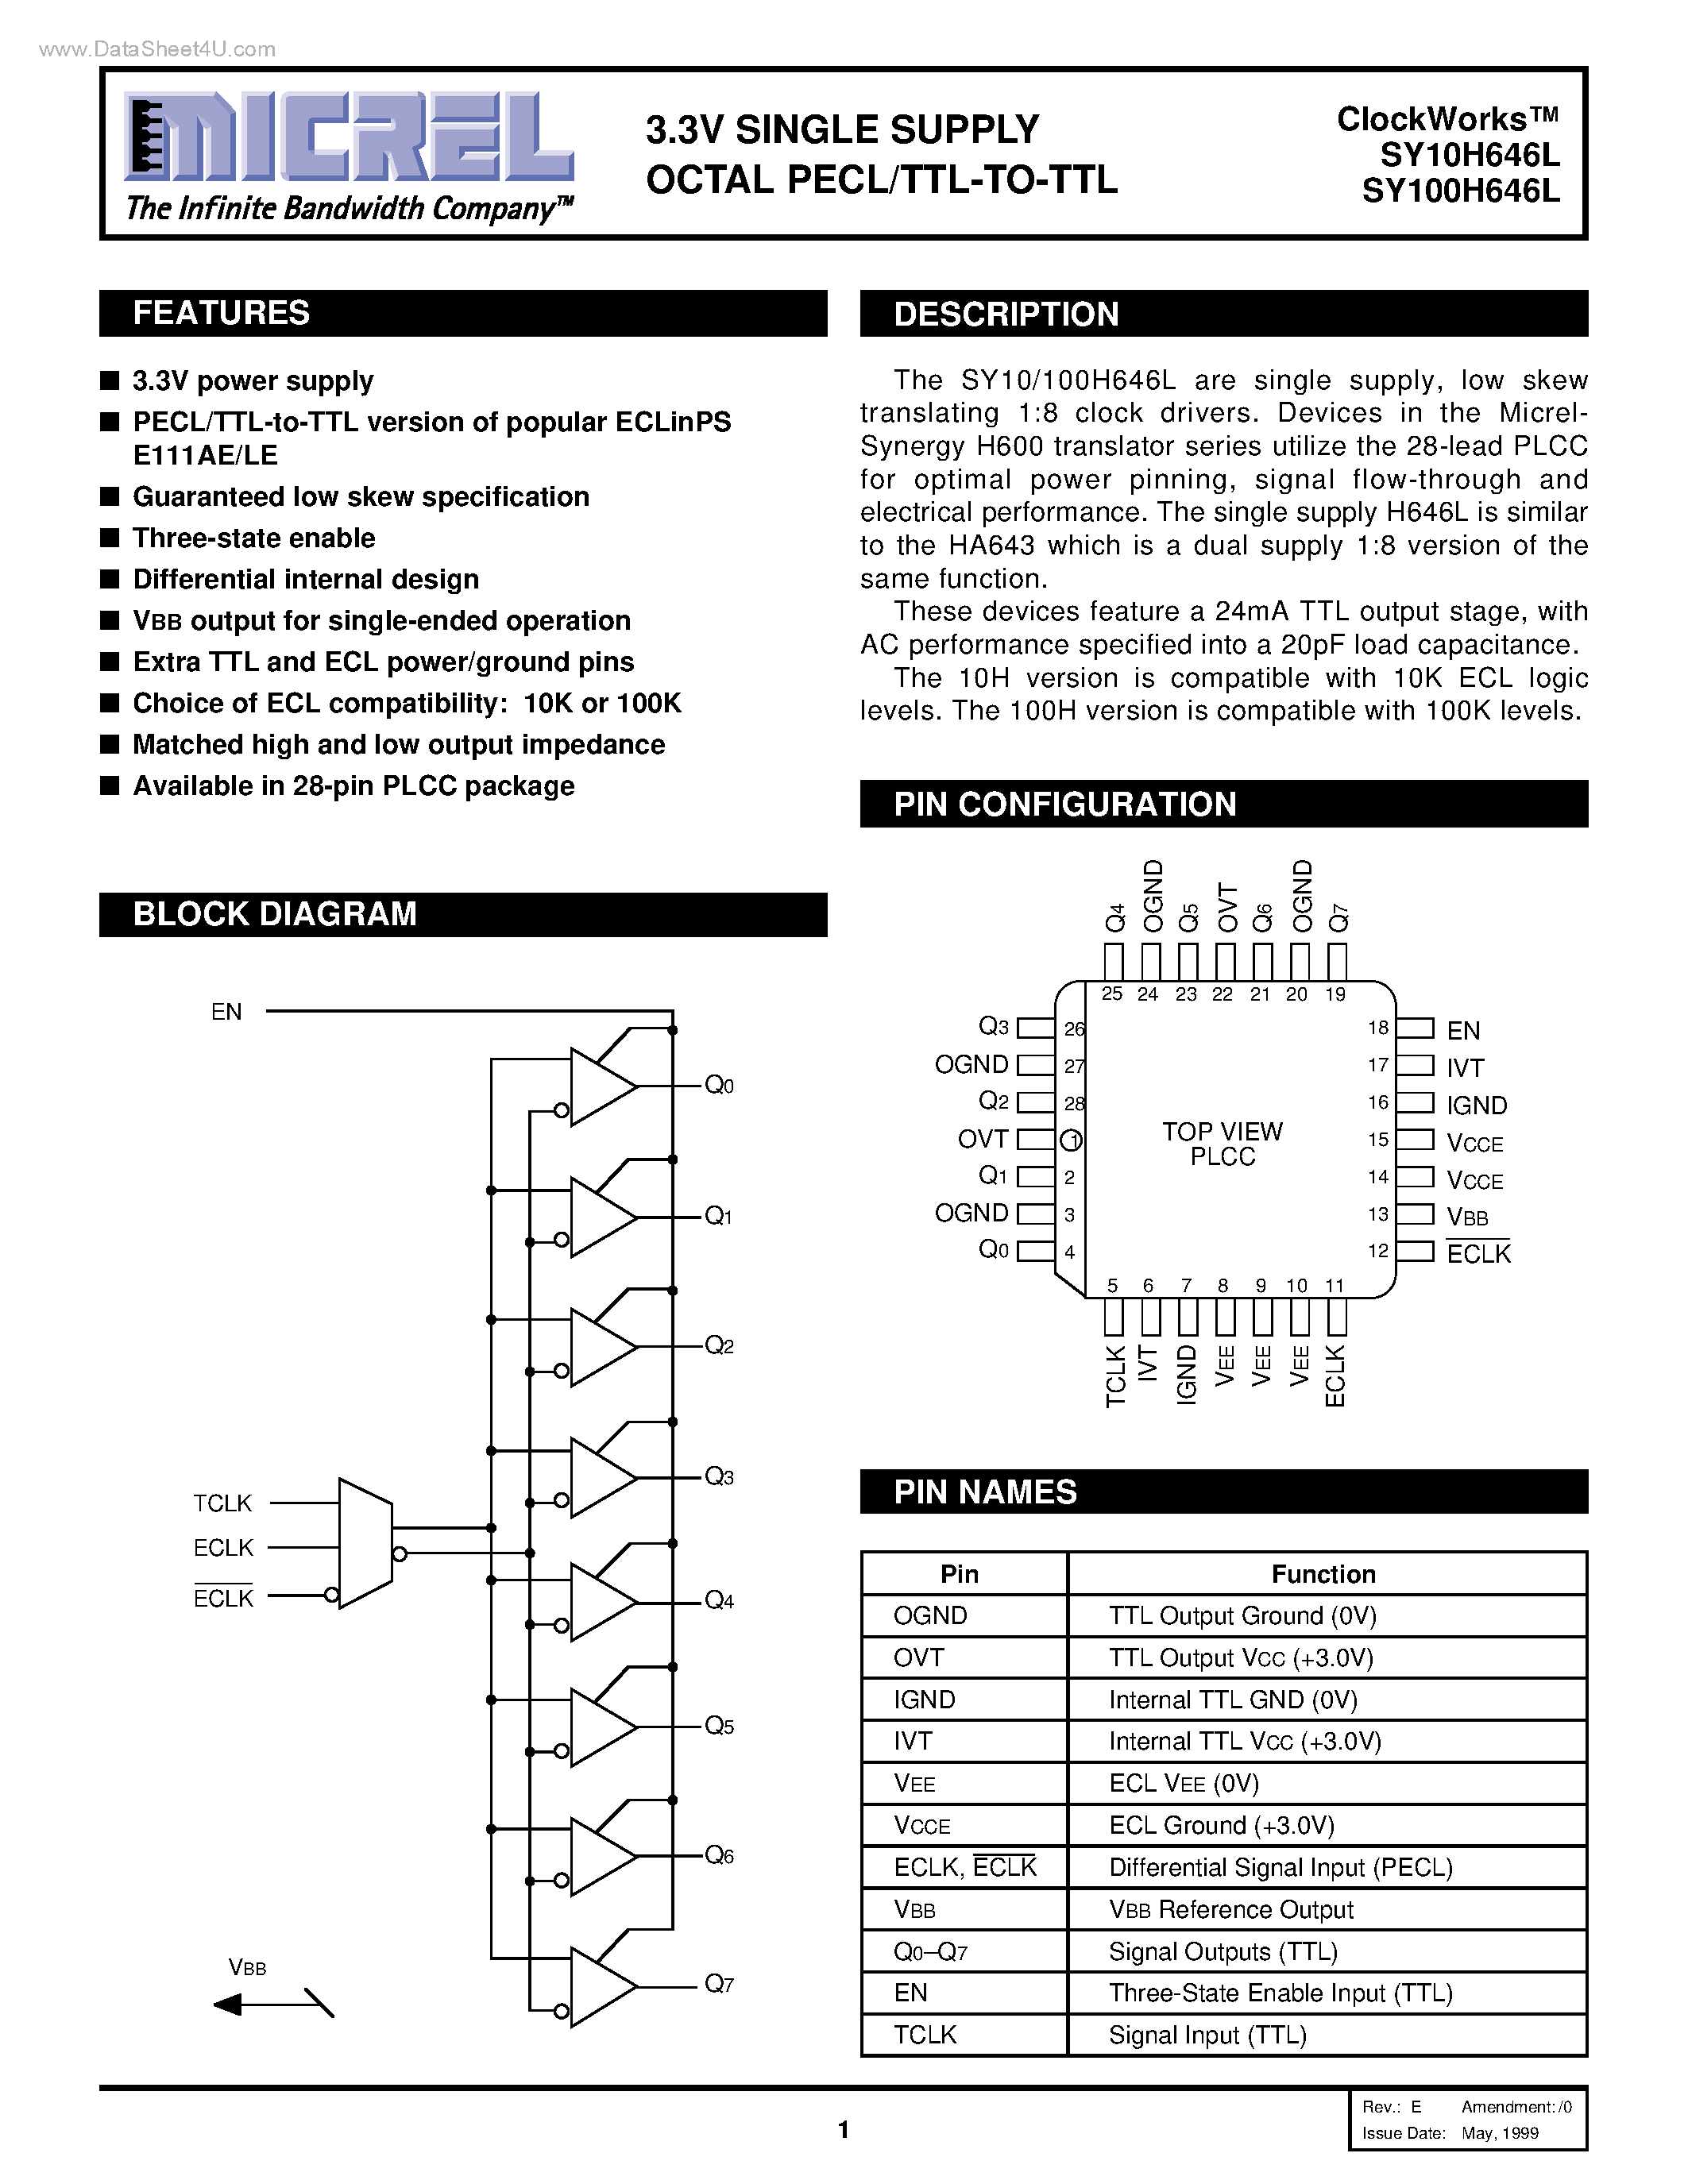 Datasheet SY100H646L - 3.3V SINGLE SUPPLY OCTAL PECL/TTL-TO-TTL page 1